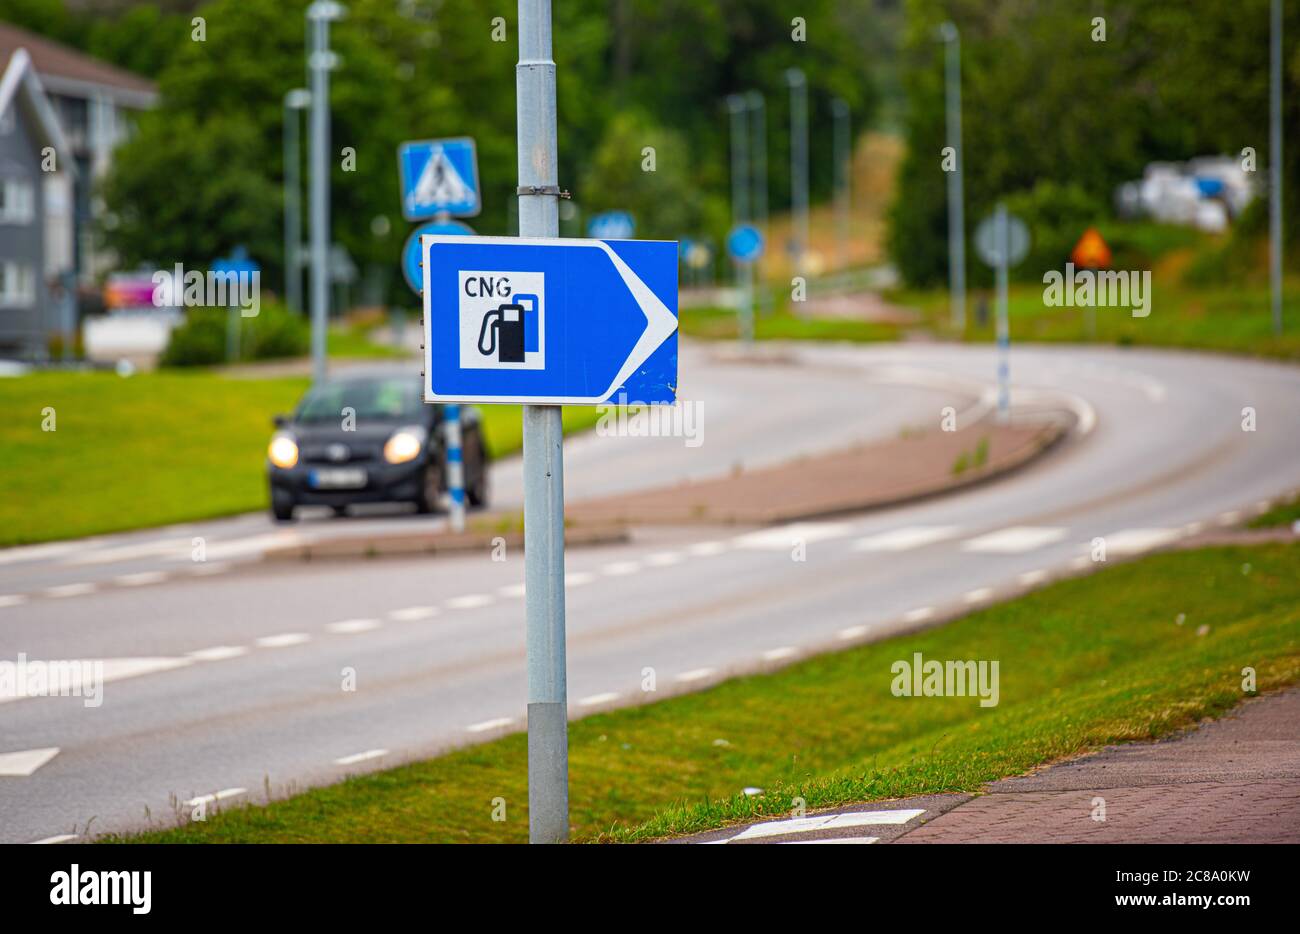 Sign pointing to a CNG filling station. Stock Photo